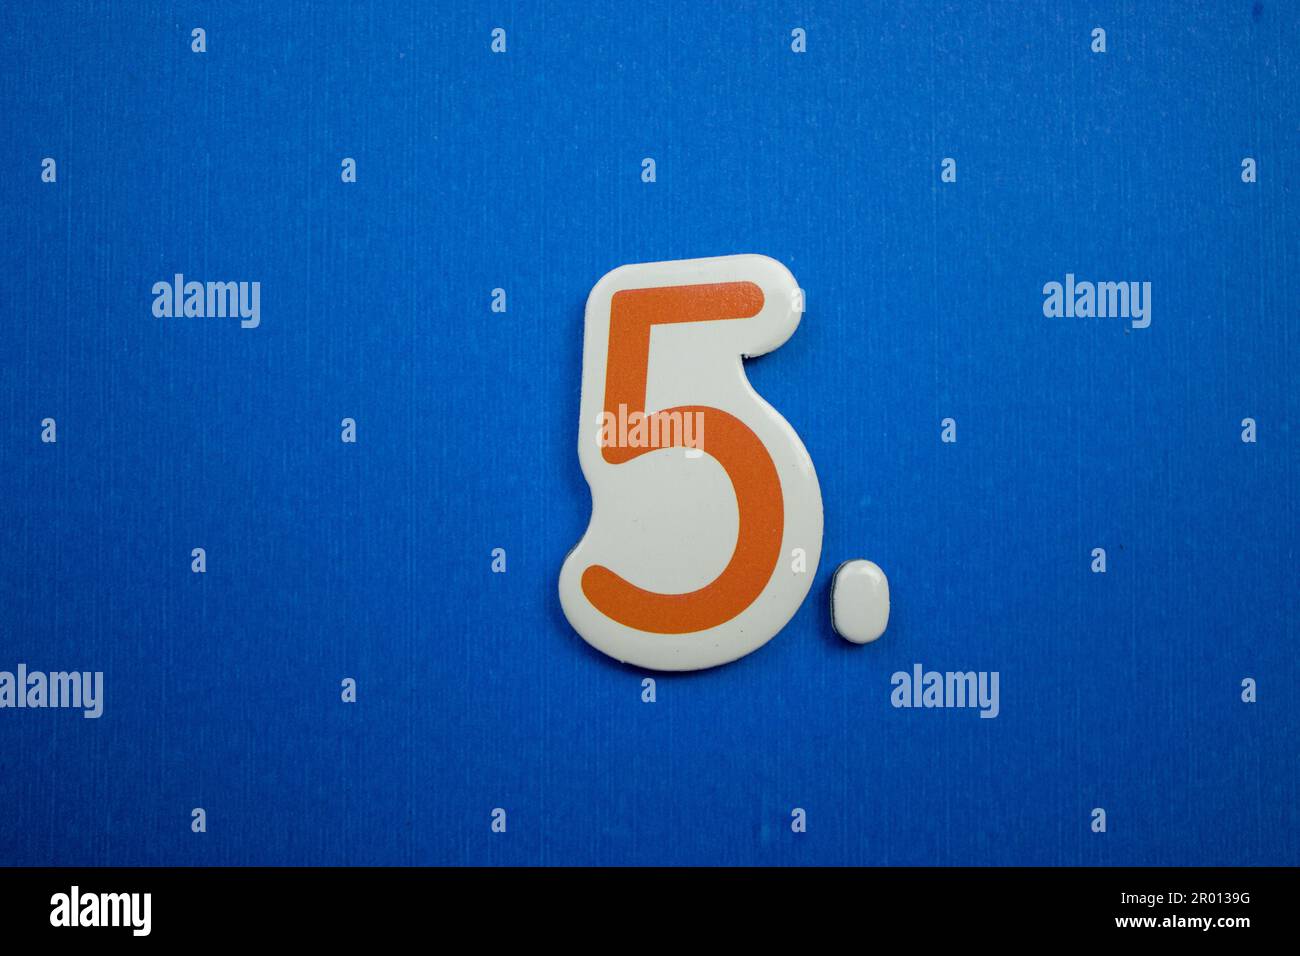 The number 5, placed on a blue background, photographed from above, colored orange and white. Stock Photo